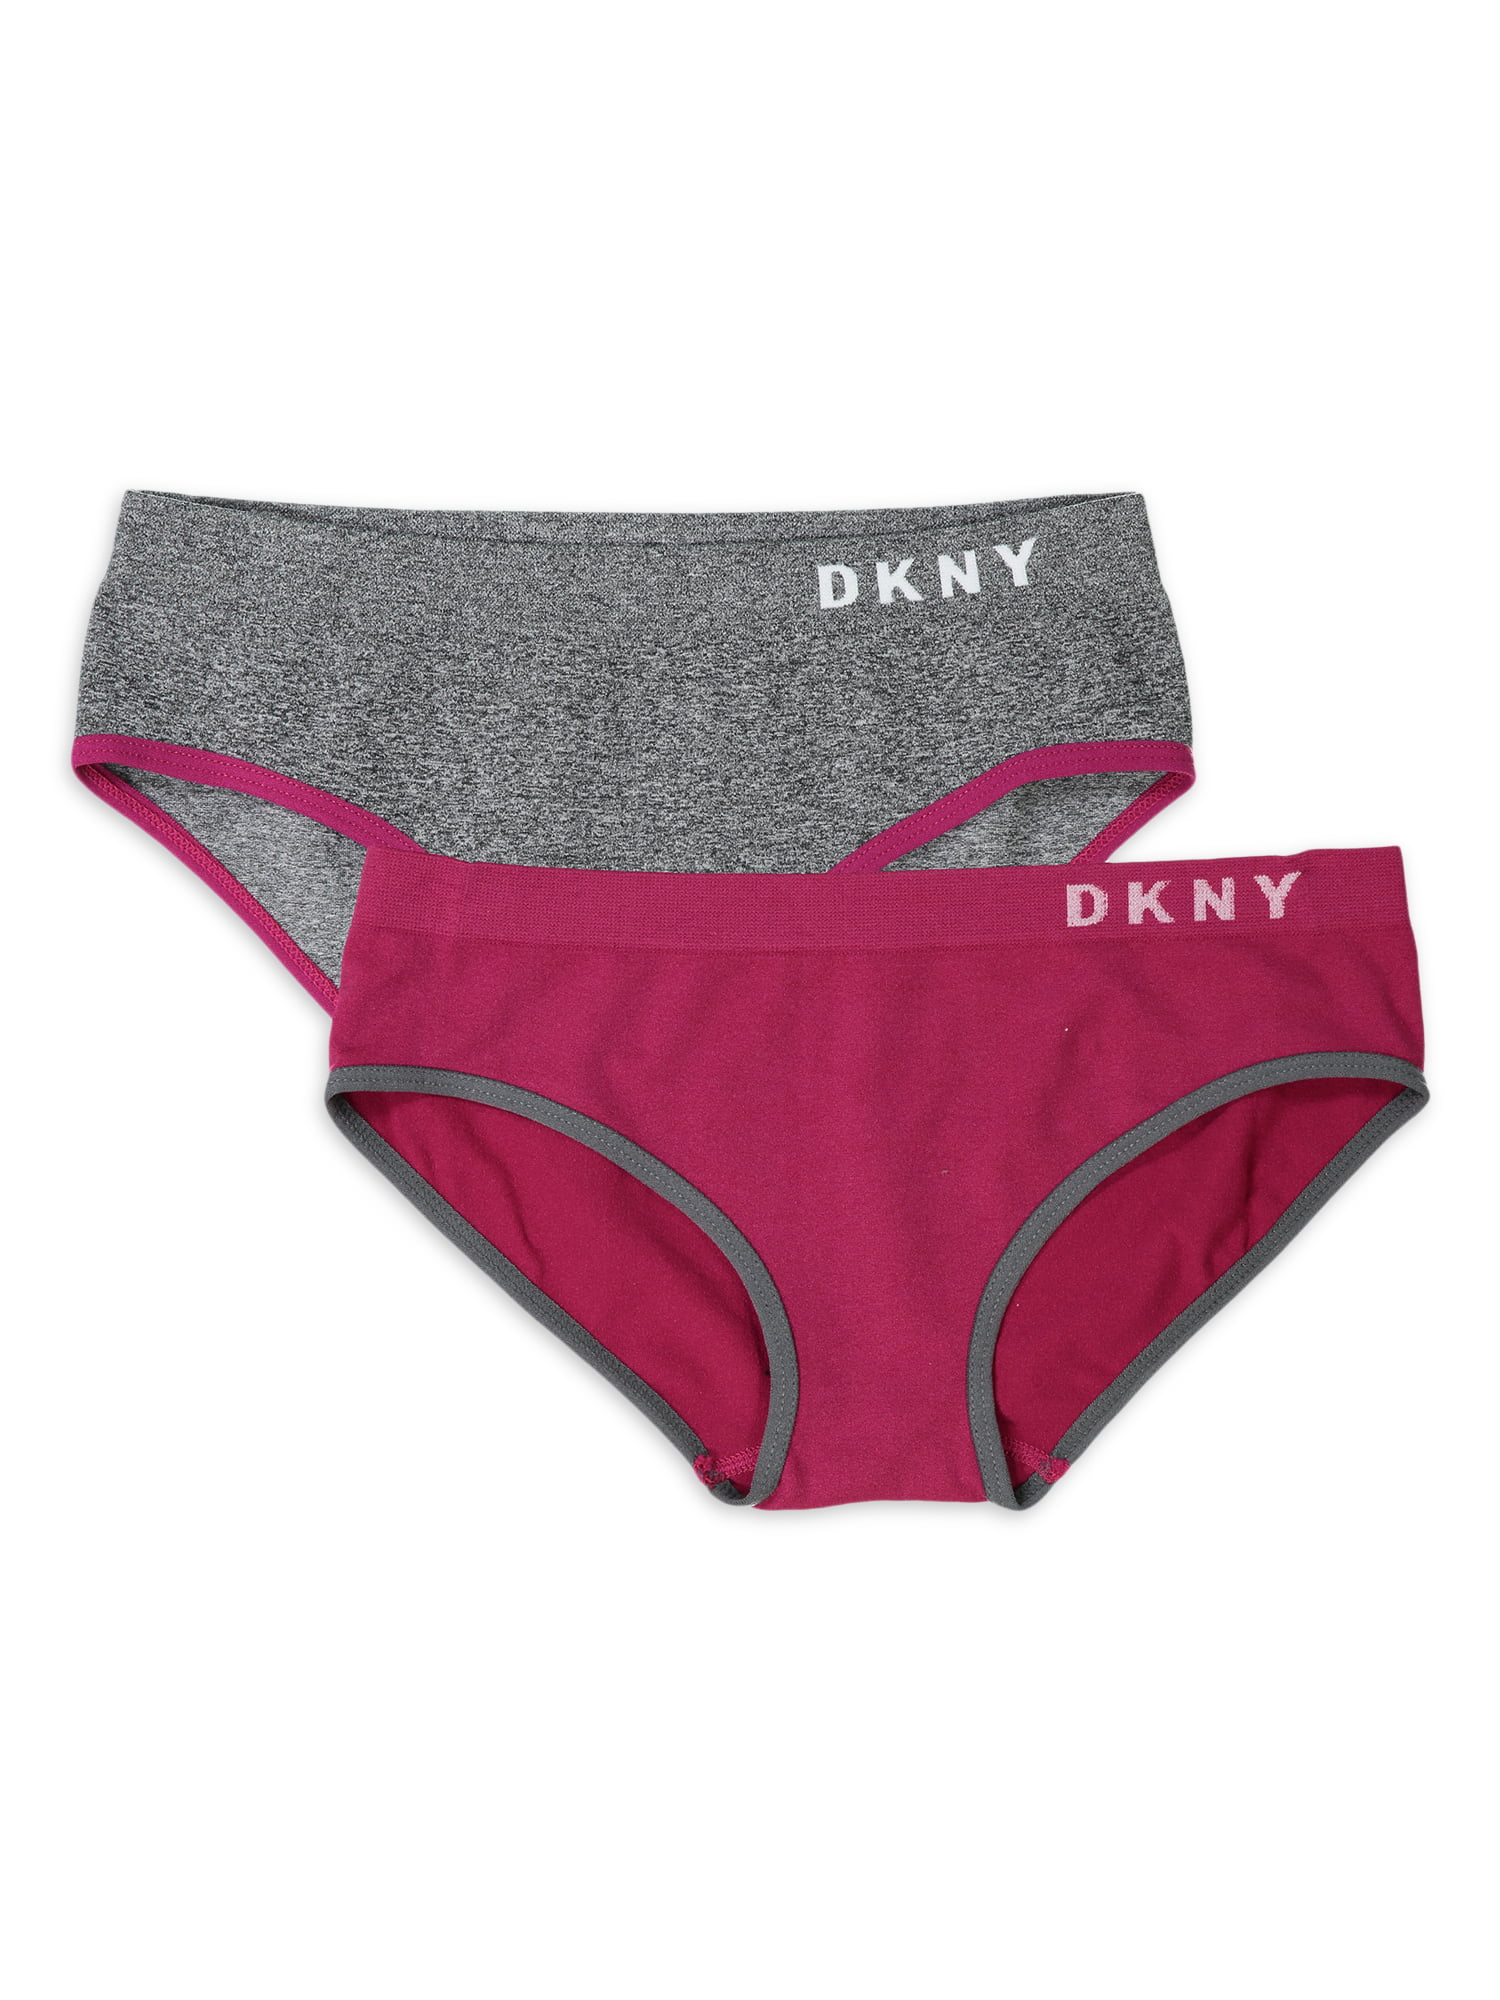 DKNY Girls Underwear, 2 Pack Hipster Seamless Panties, Sizes S-XL